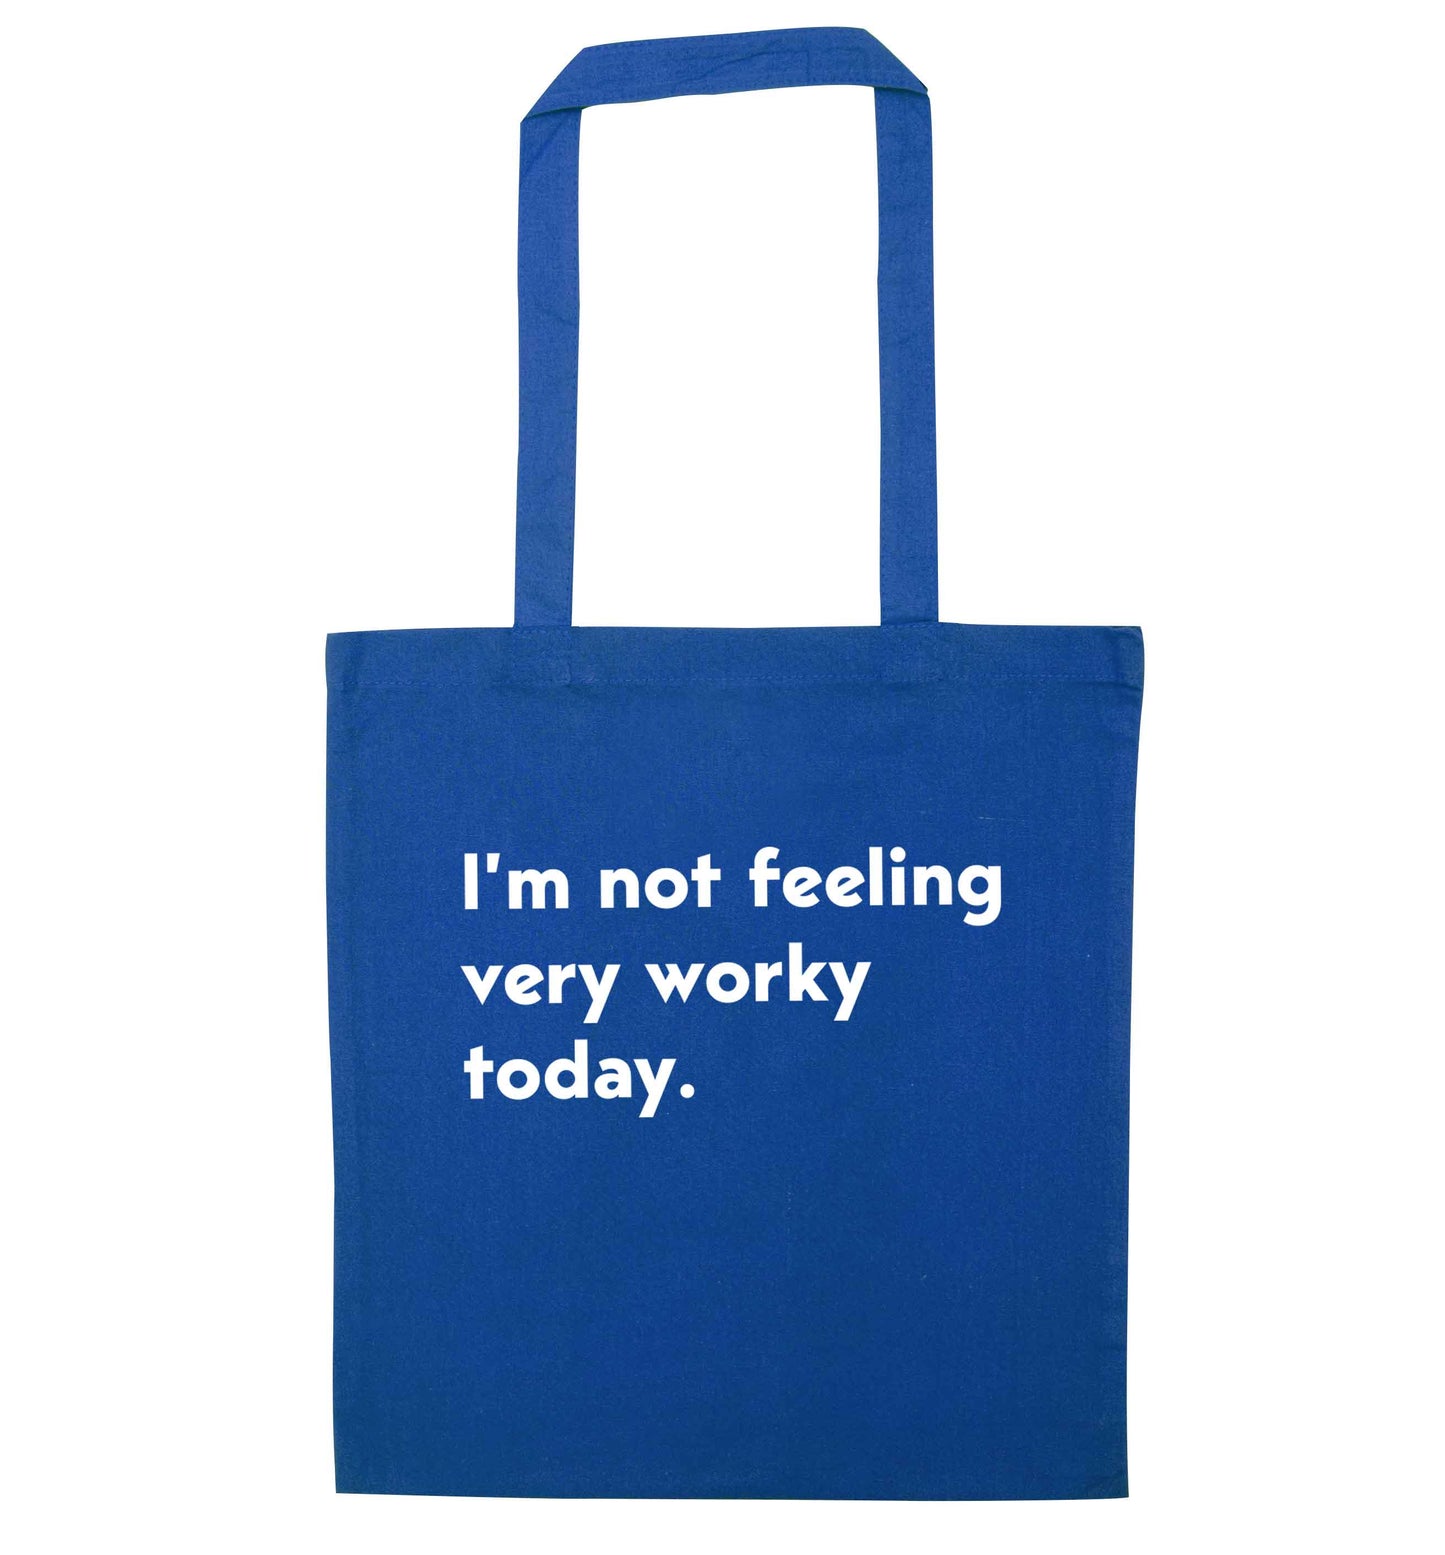 I'm not feeling very worky today blue tote bag